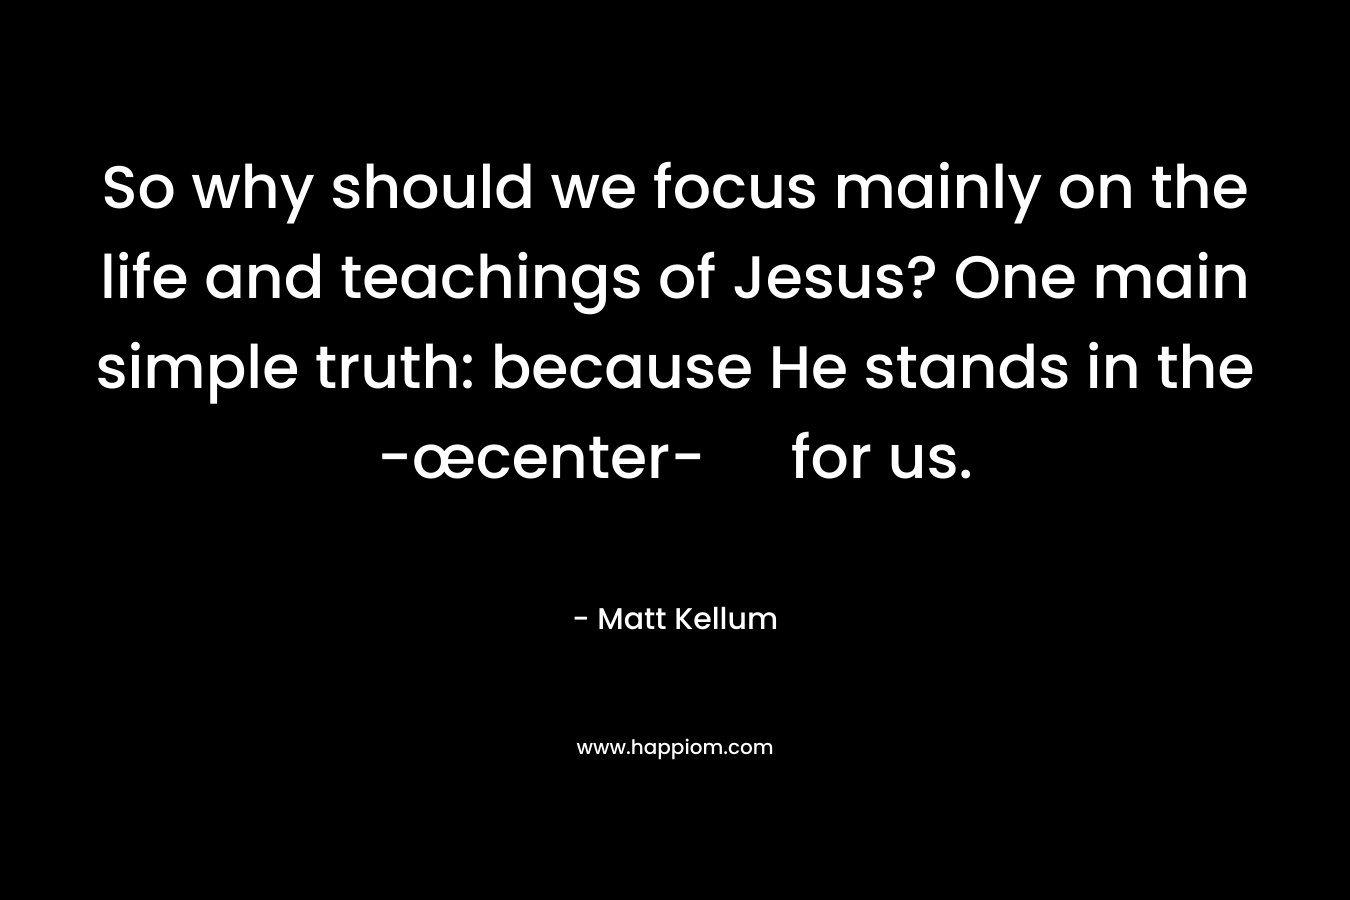 So why should we focus mainly on the life and teachings of Jesus? One main simple truth: because He stands in the -œcenter- for us.